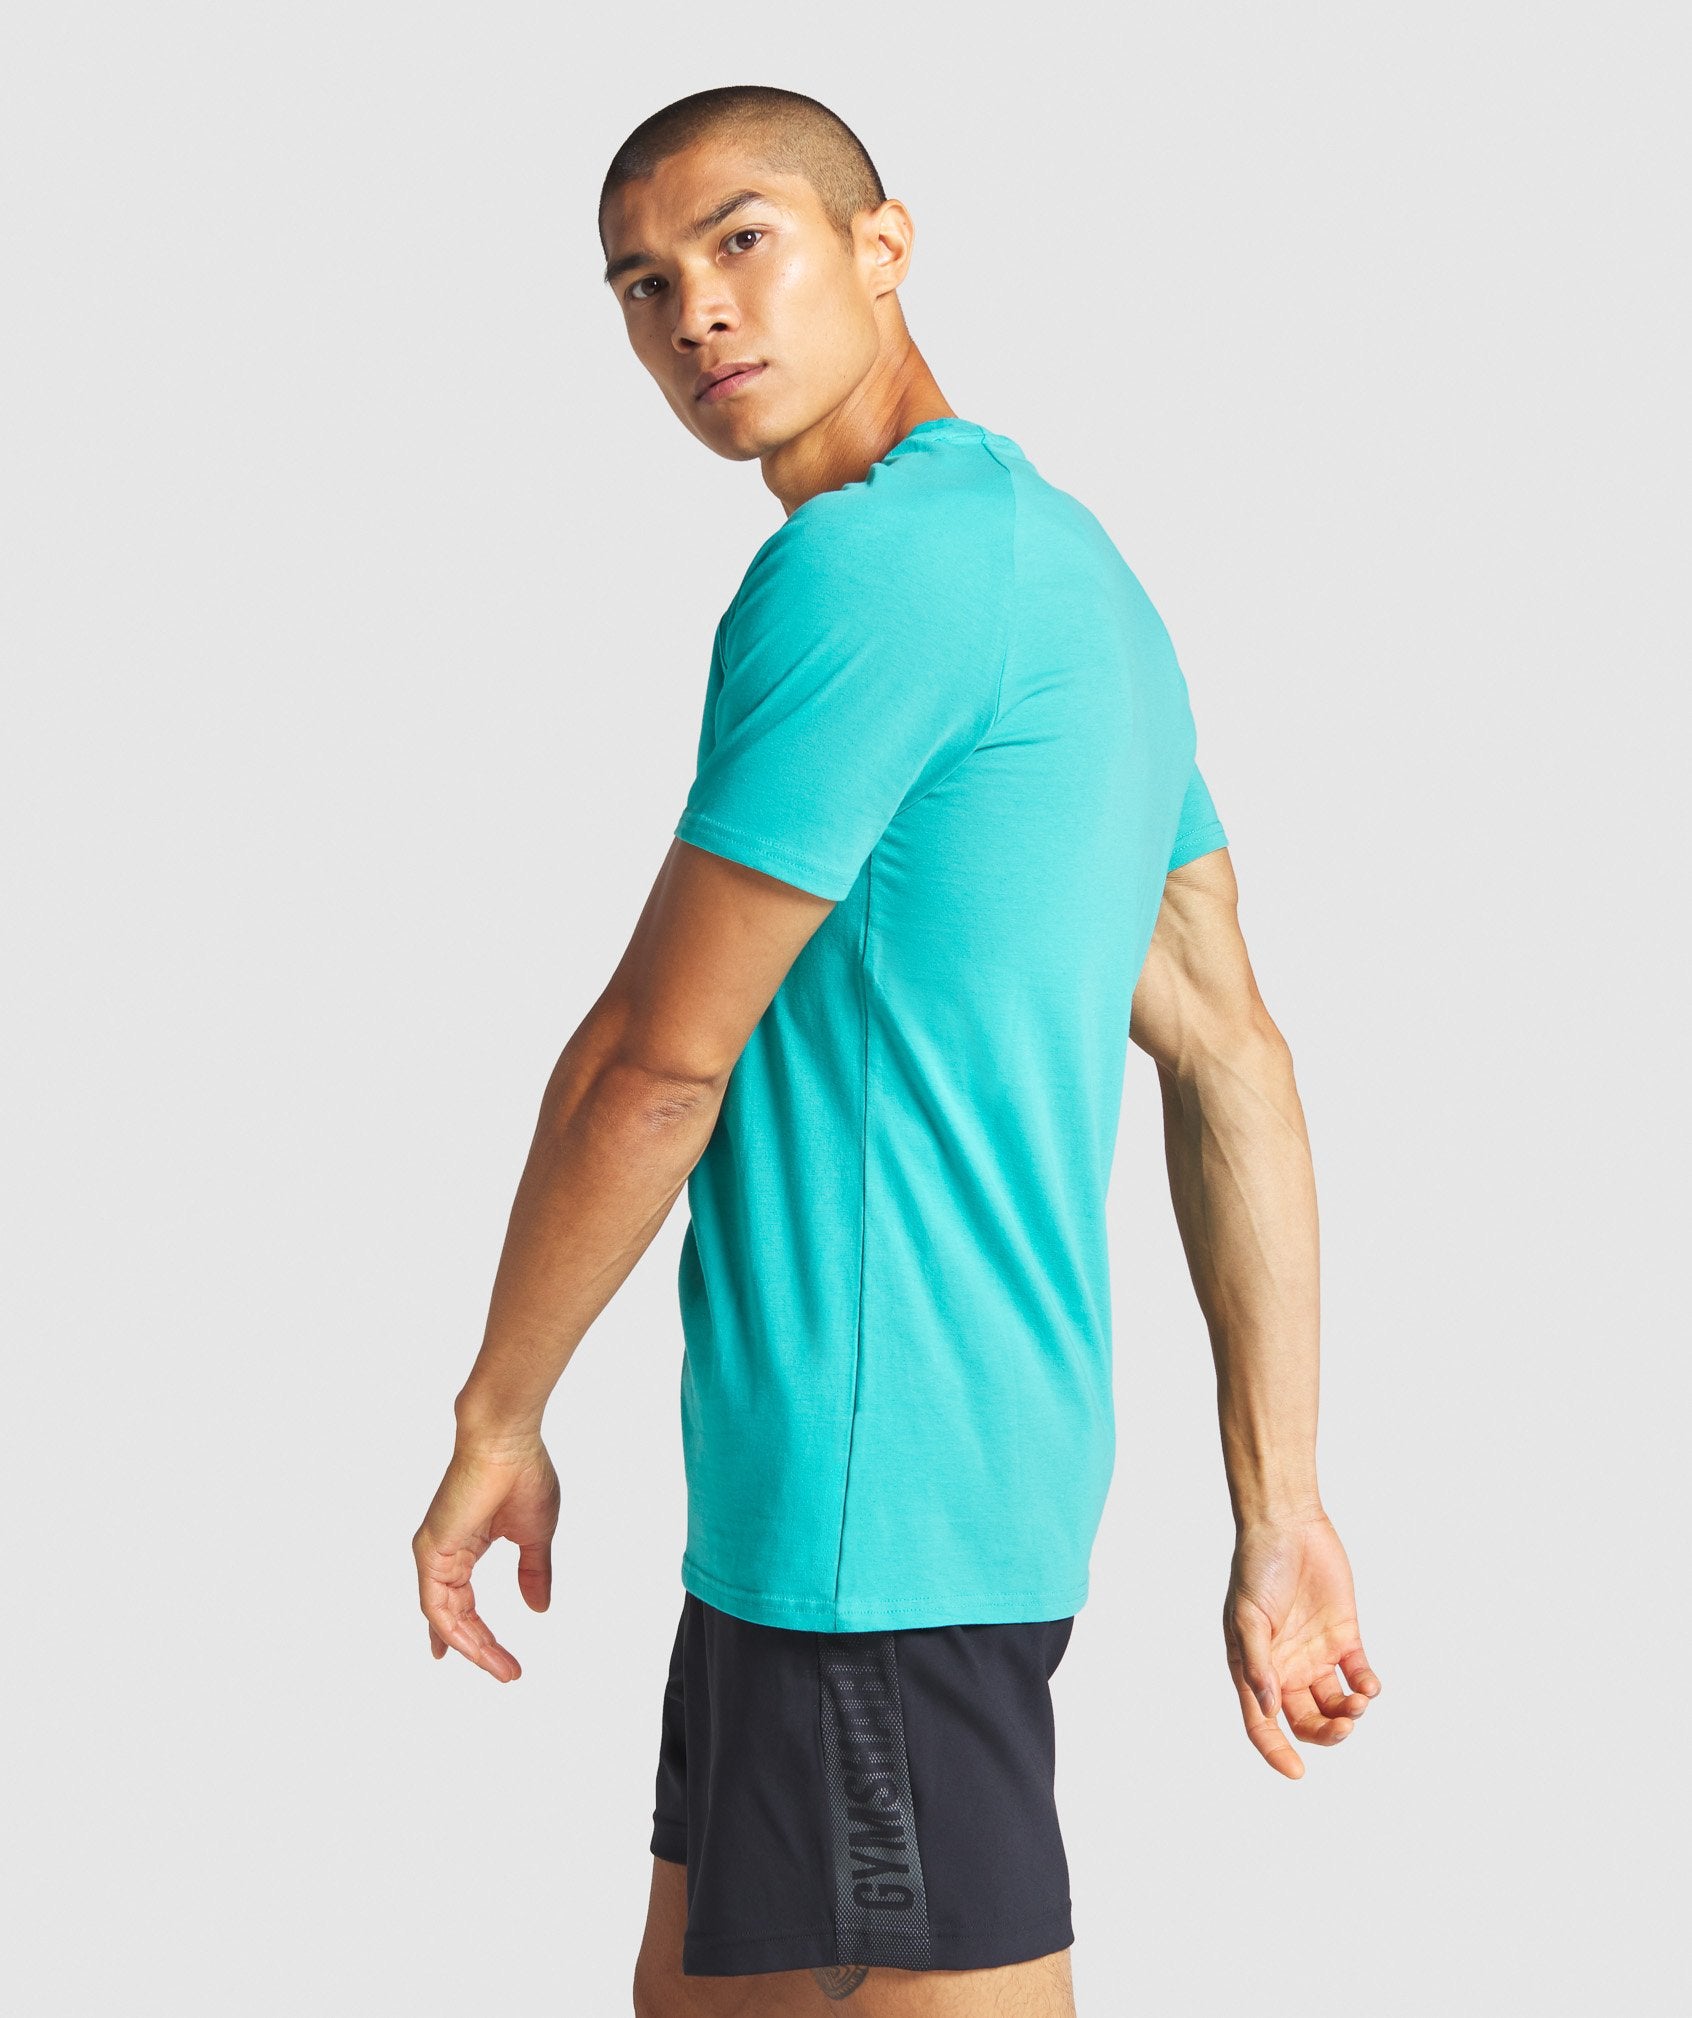 Apollo T-Shirt in Teal